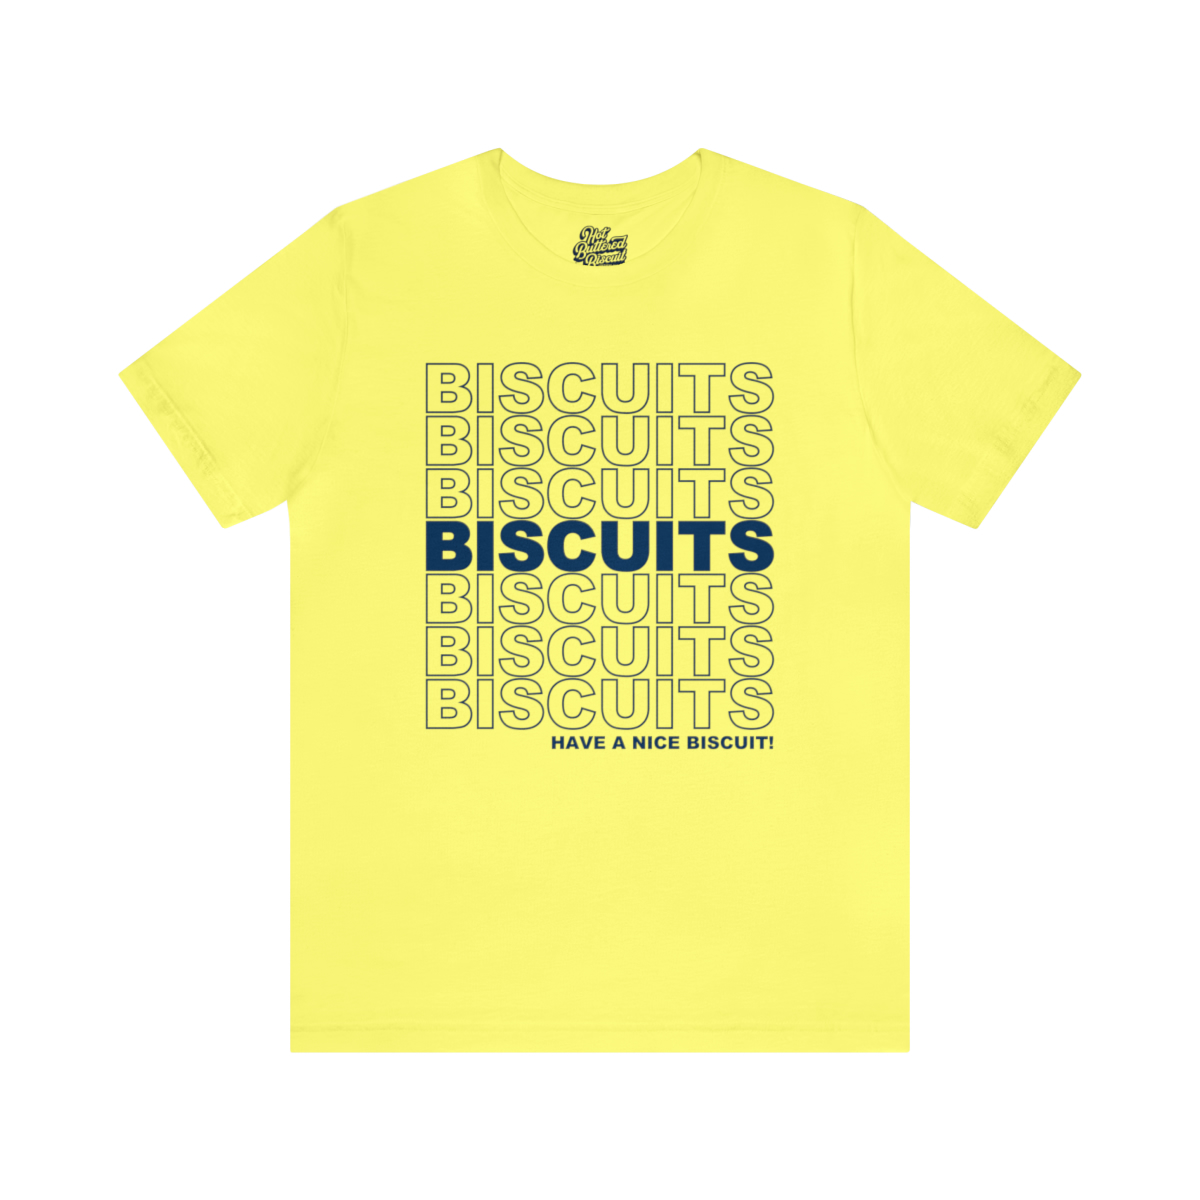 Benjamin Franklin’s famous quote has been misinterpreted over the years. The true quote was “Biscuits are proof that God loves us and wants us to be happy”. It’s impossible to…